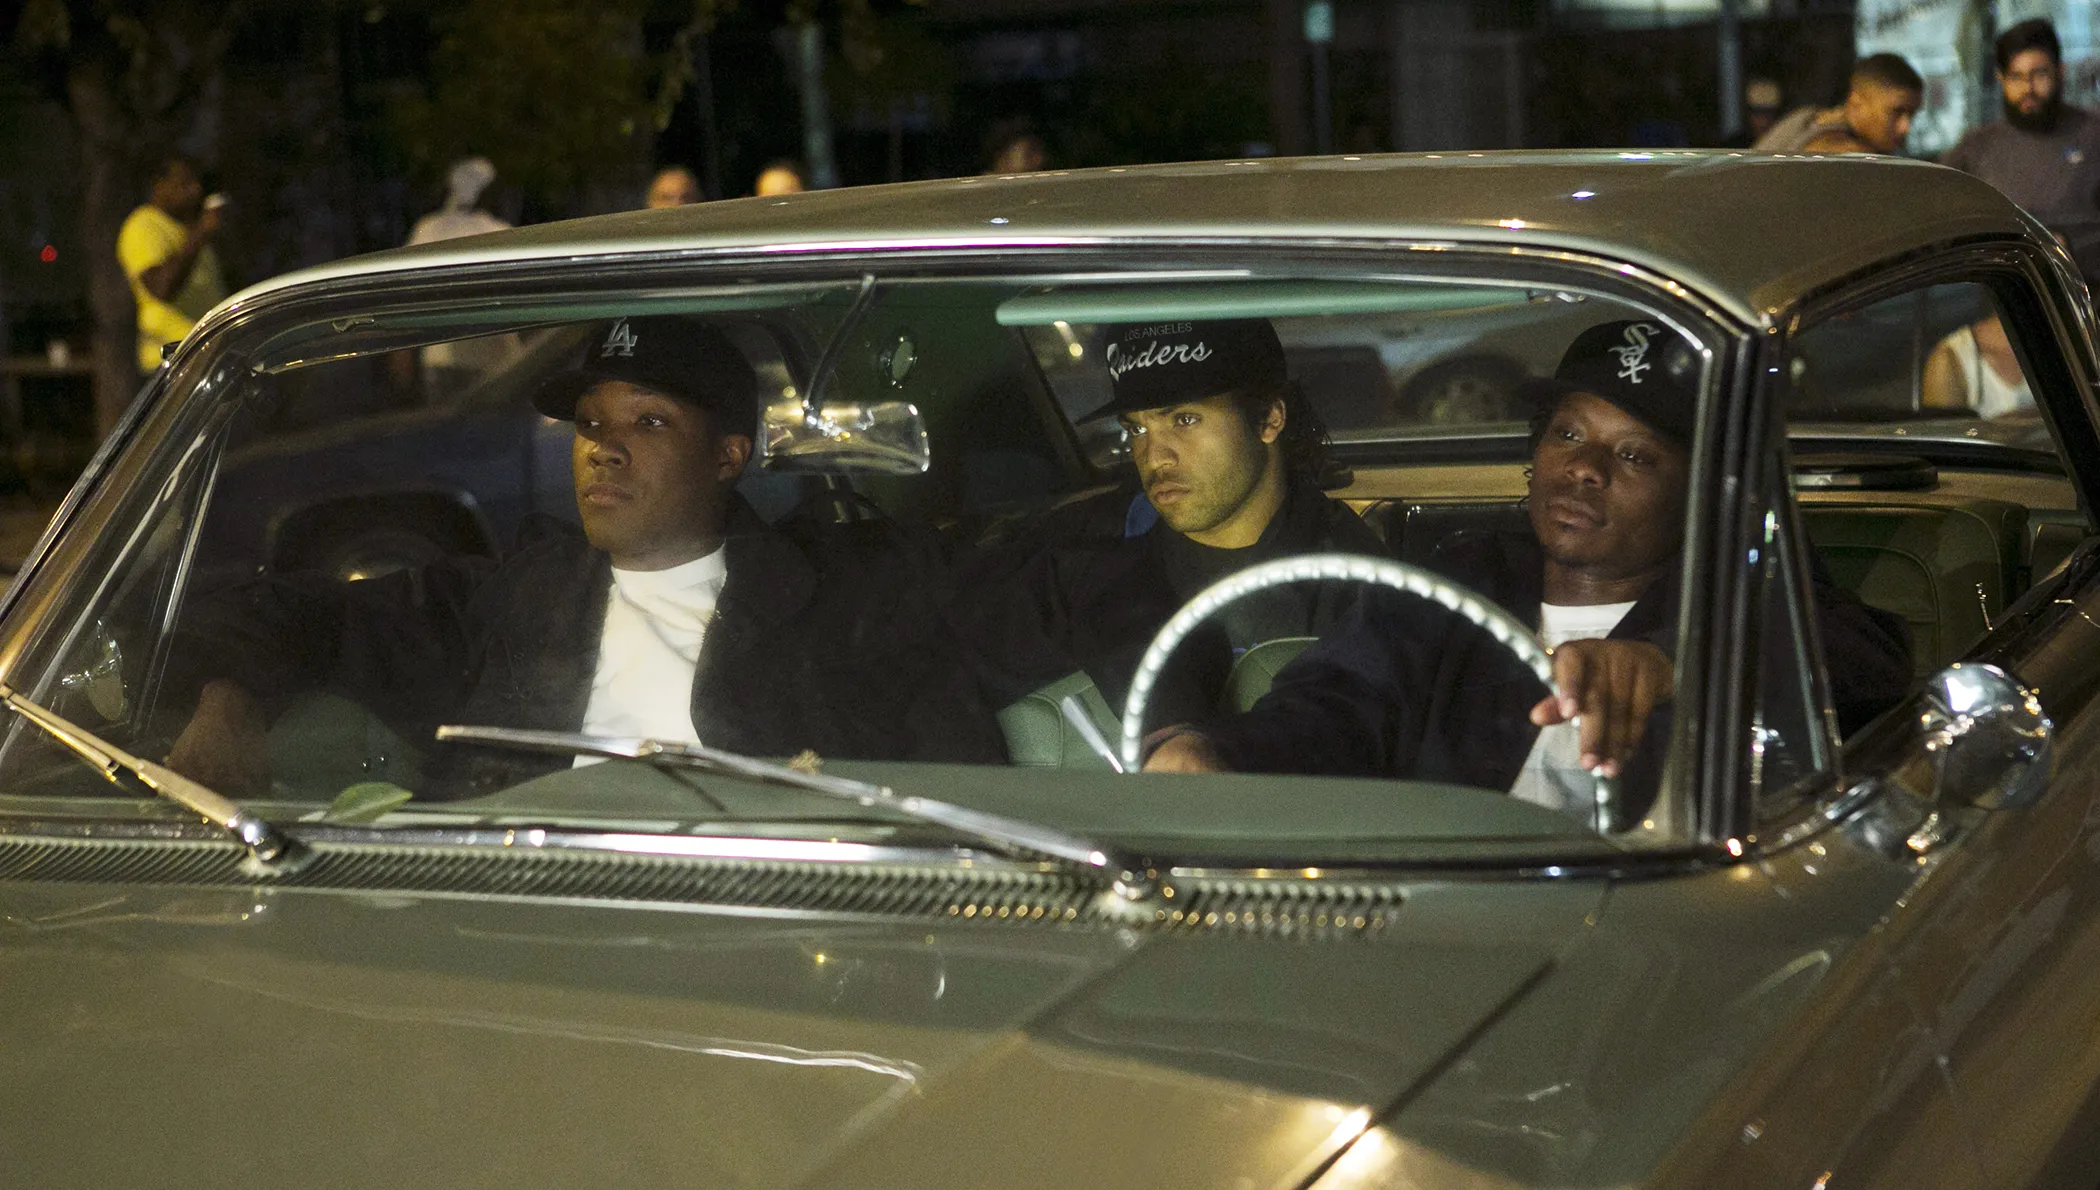 Straight Outta Compton' Movie: Dr. Dre Net Worth, Ice Cube Net Worth and  N.W.A.